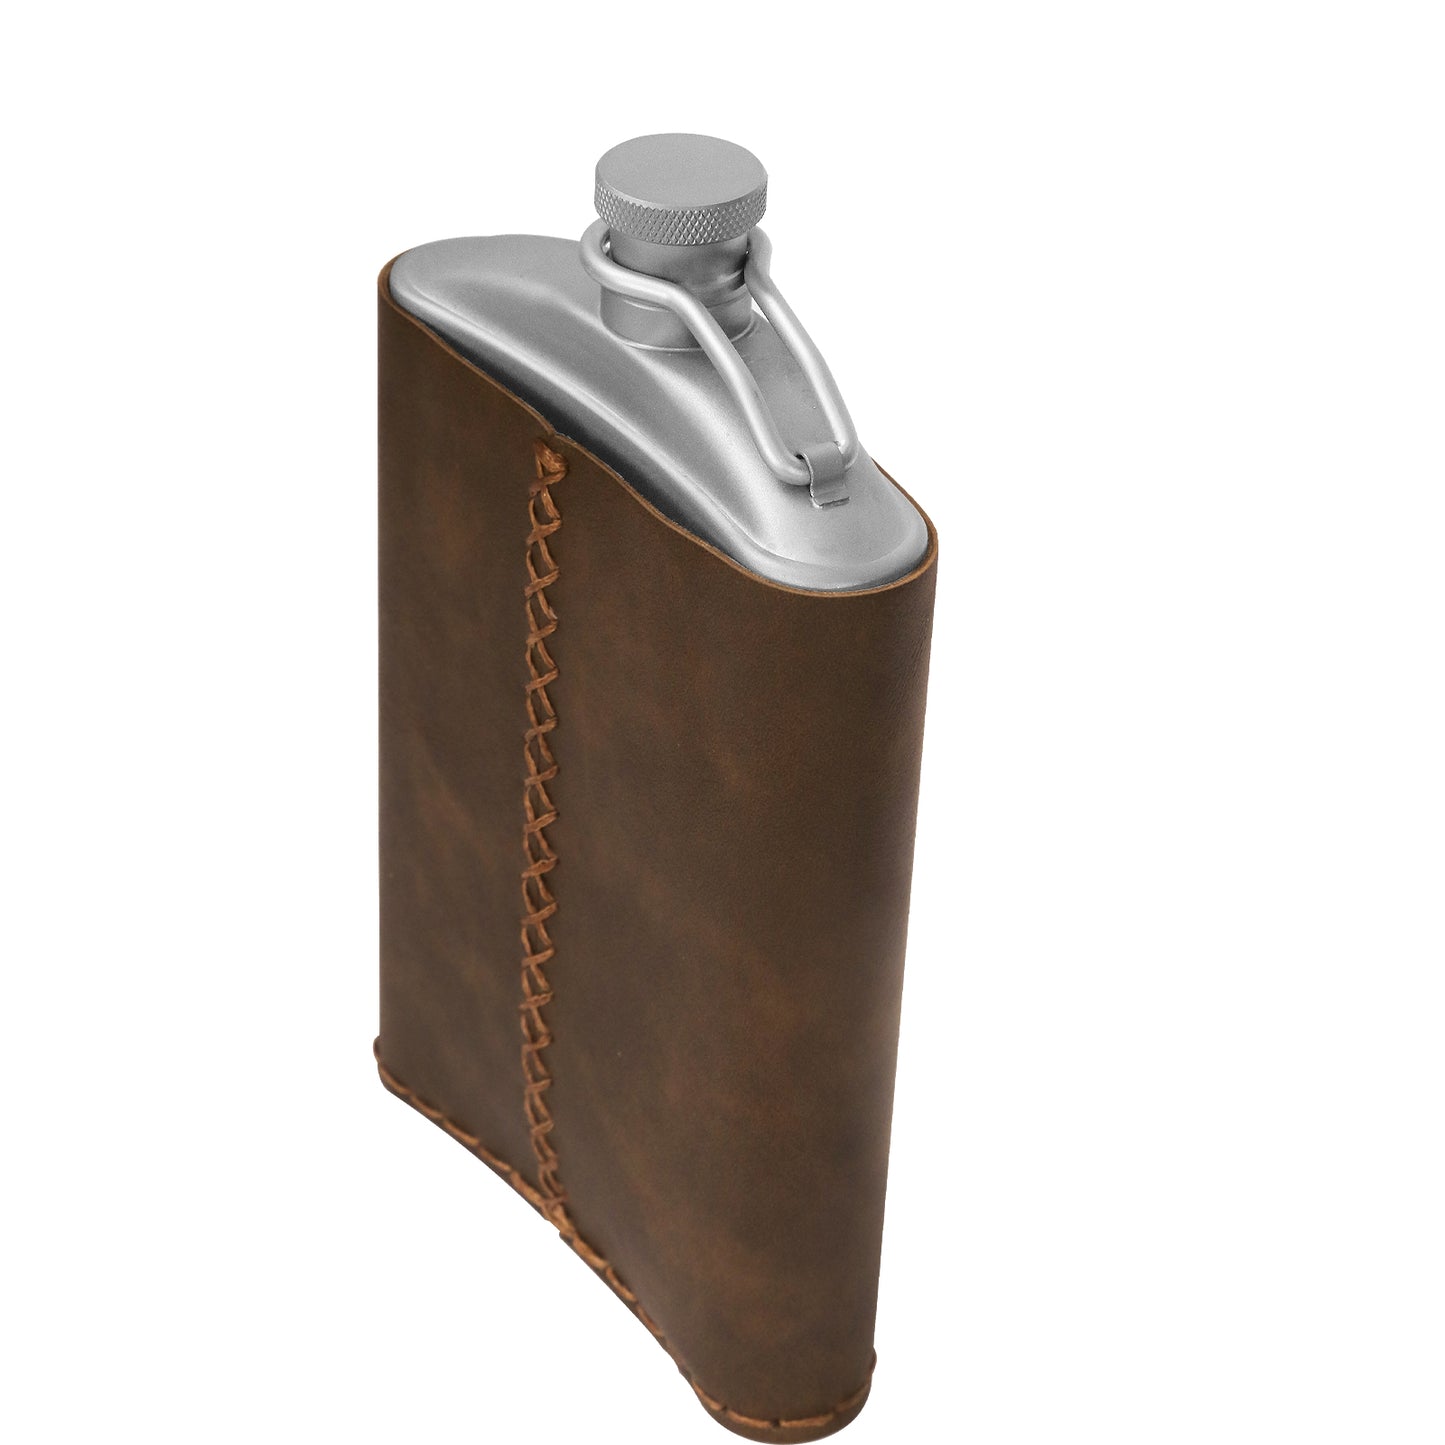 
                  
                    SilverAnt Titanium Hip Flask and Funnel 248ml/8.73 fl oz with PU leather sleeve
                  
                